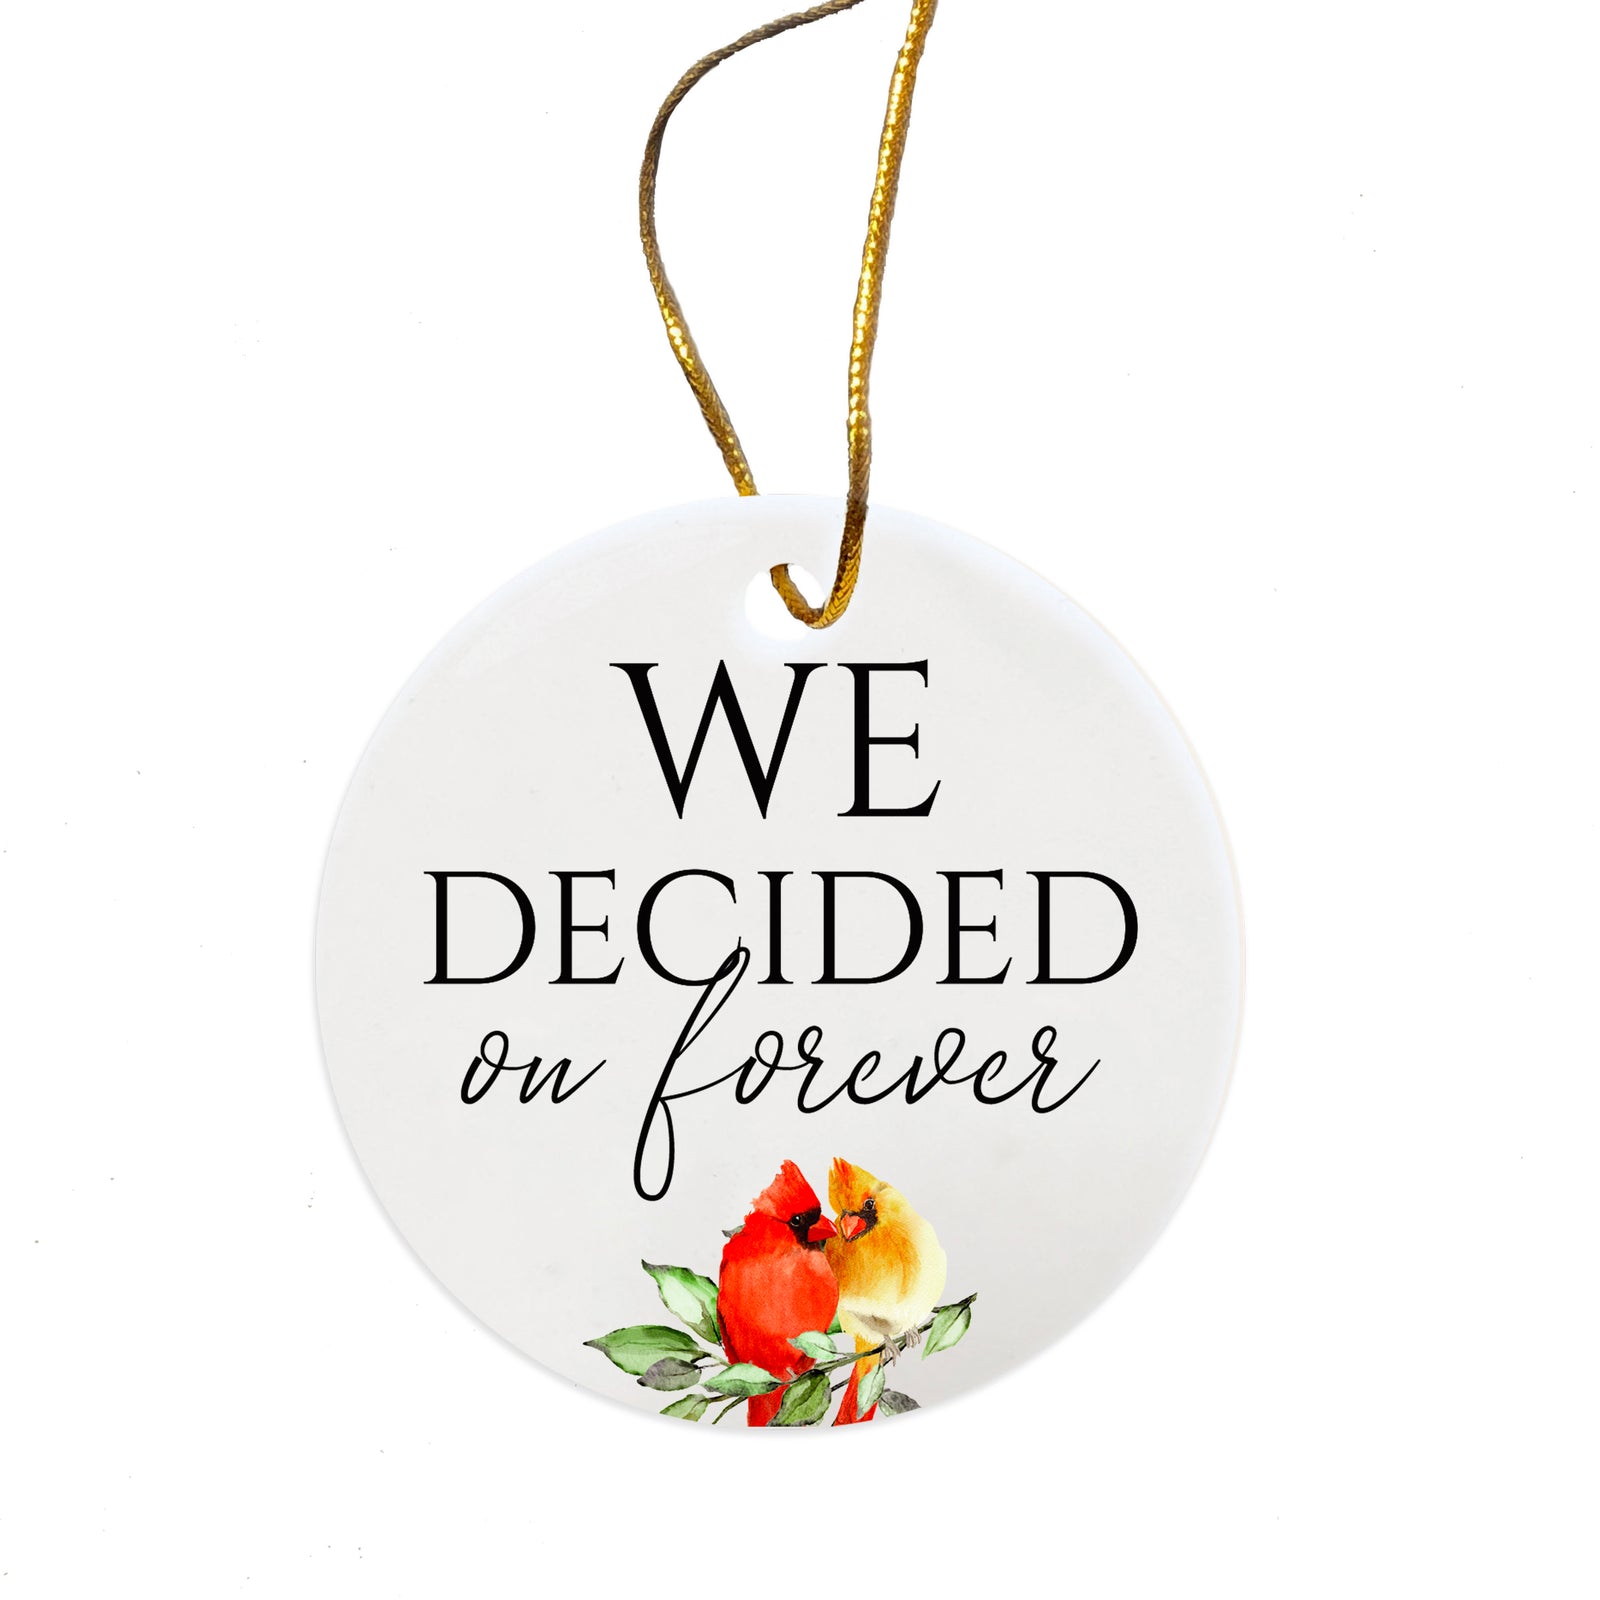 White Ceramic Cardinal Ornament With Everyday Verses Gift Ideas - We Decided